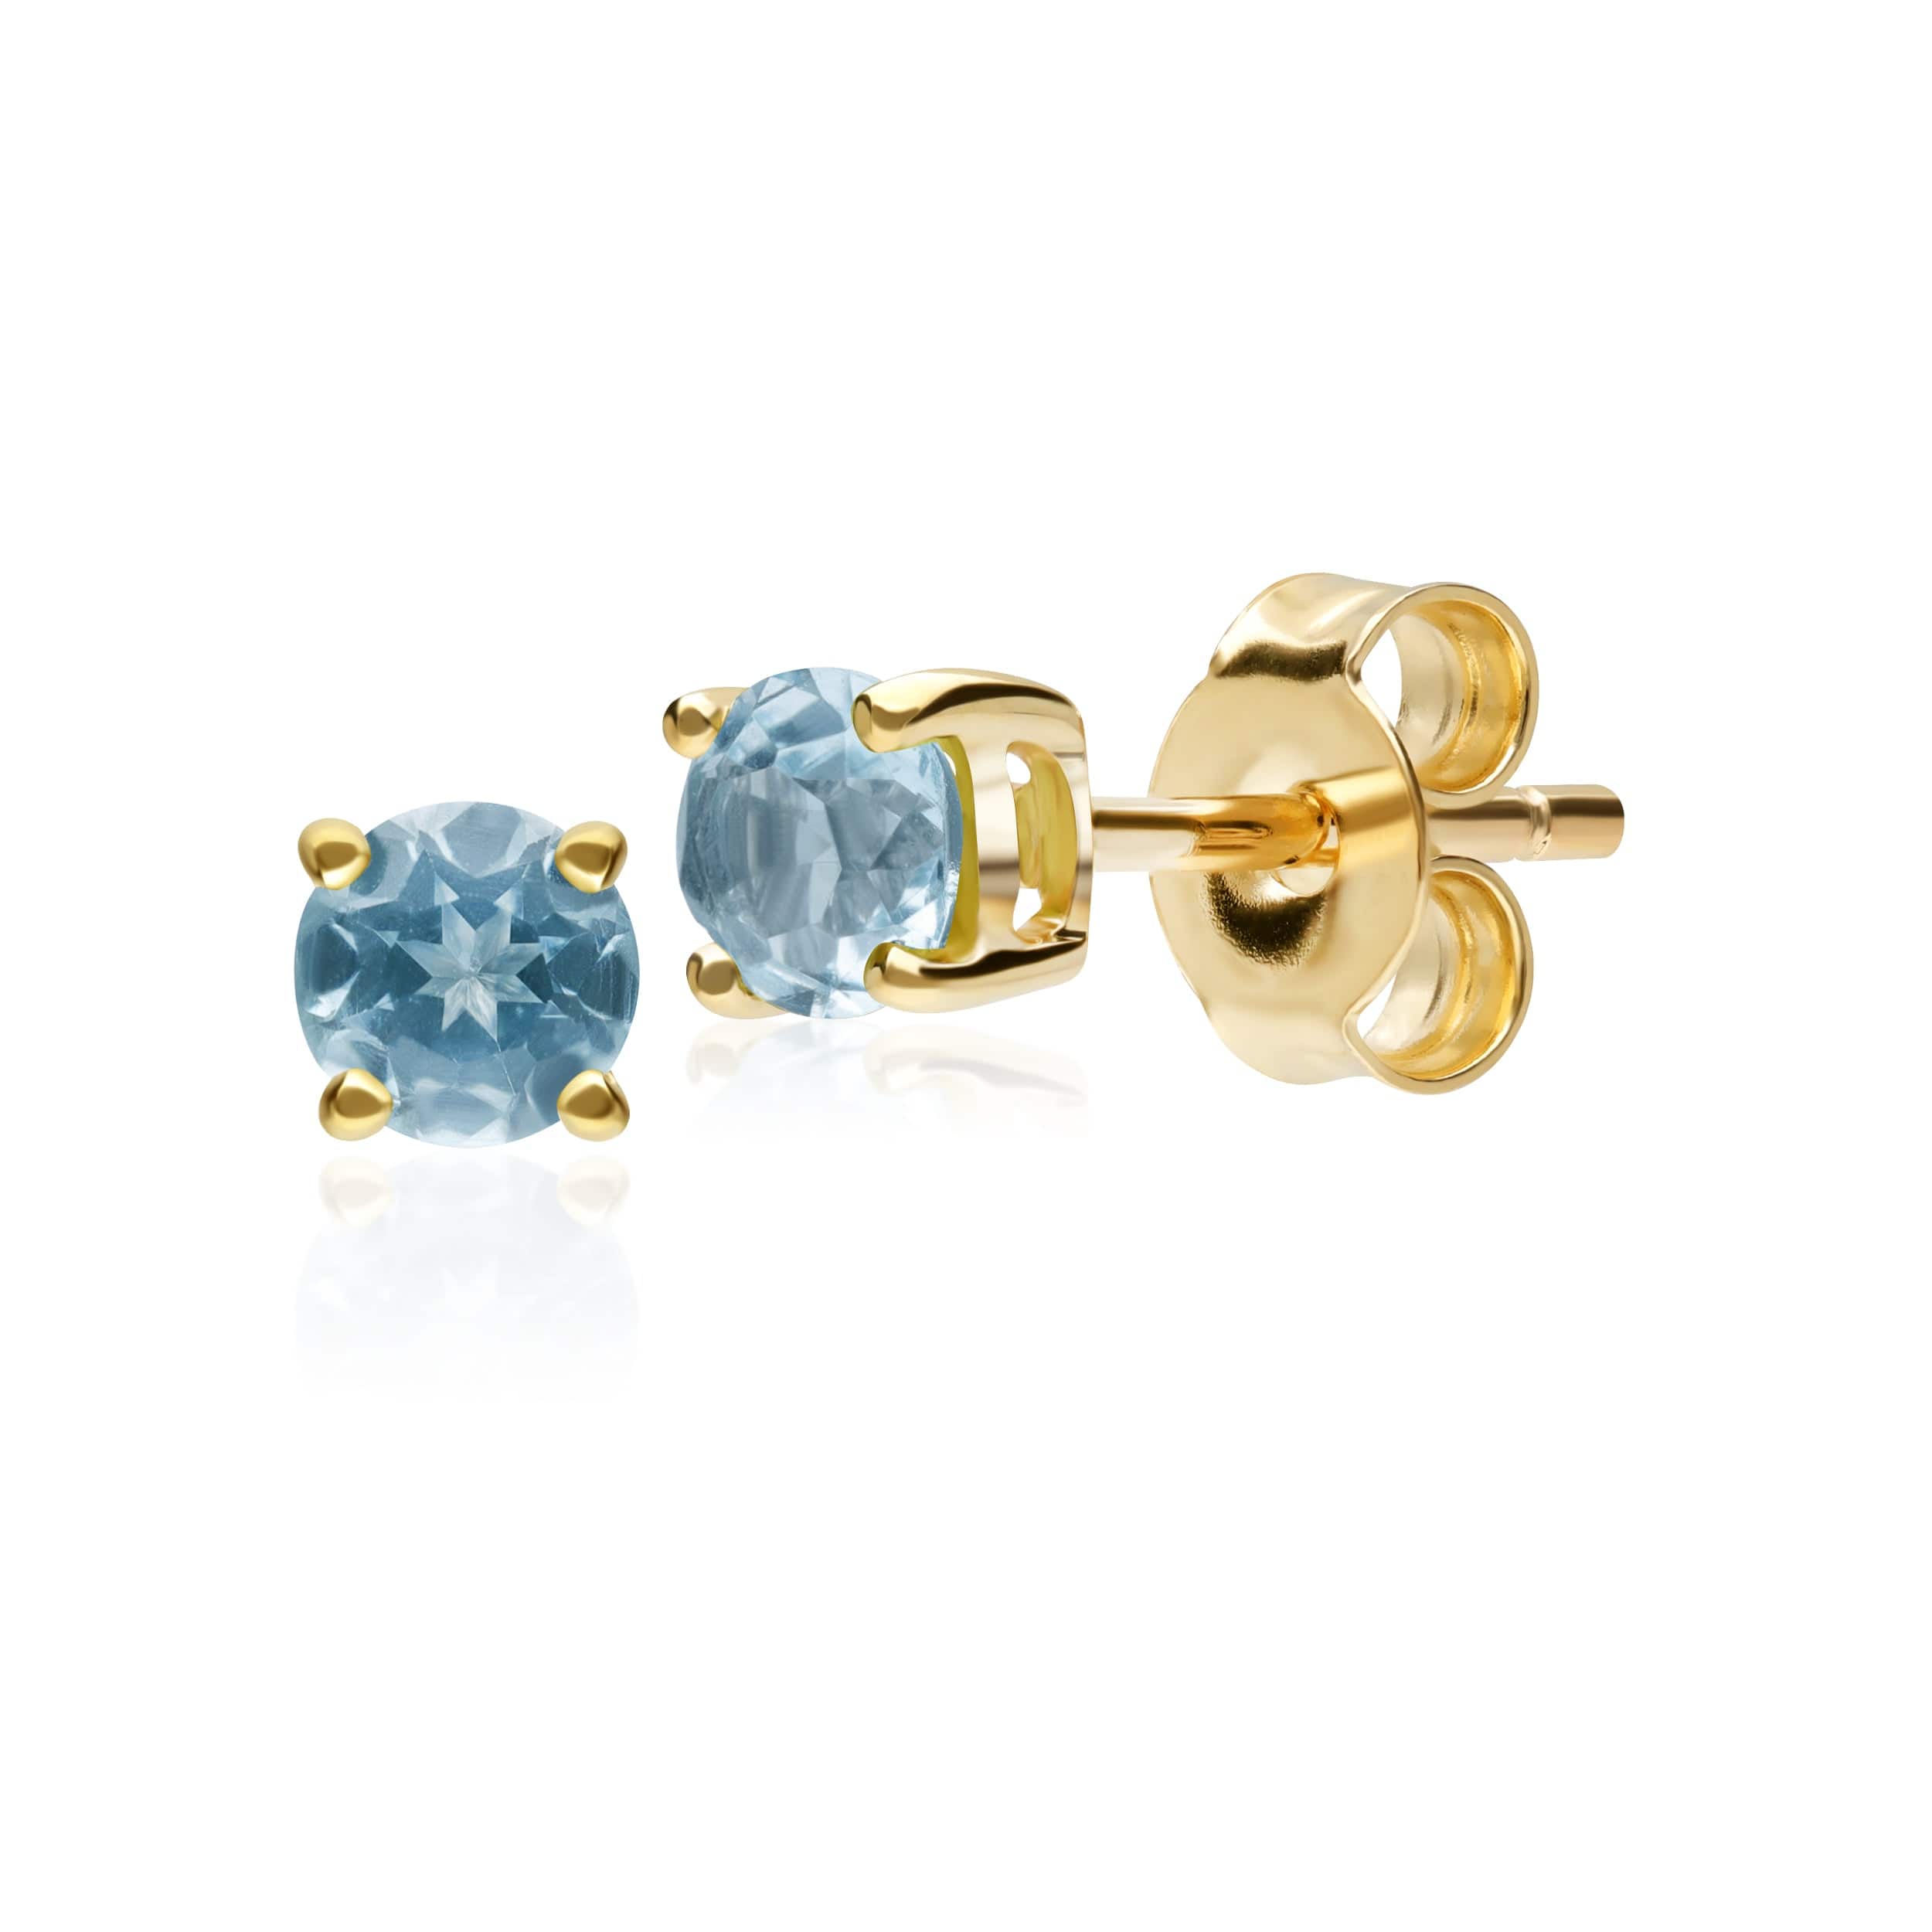 Photos - Earrings Classic Round Blue Topaz Stud  in 9ct Yellow Gold